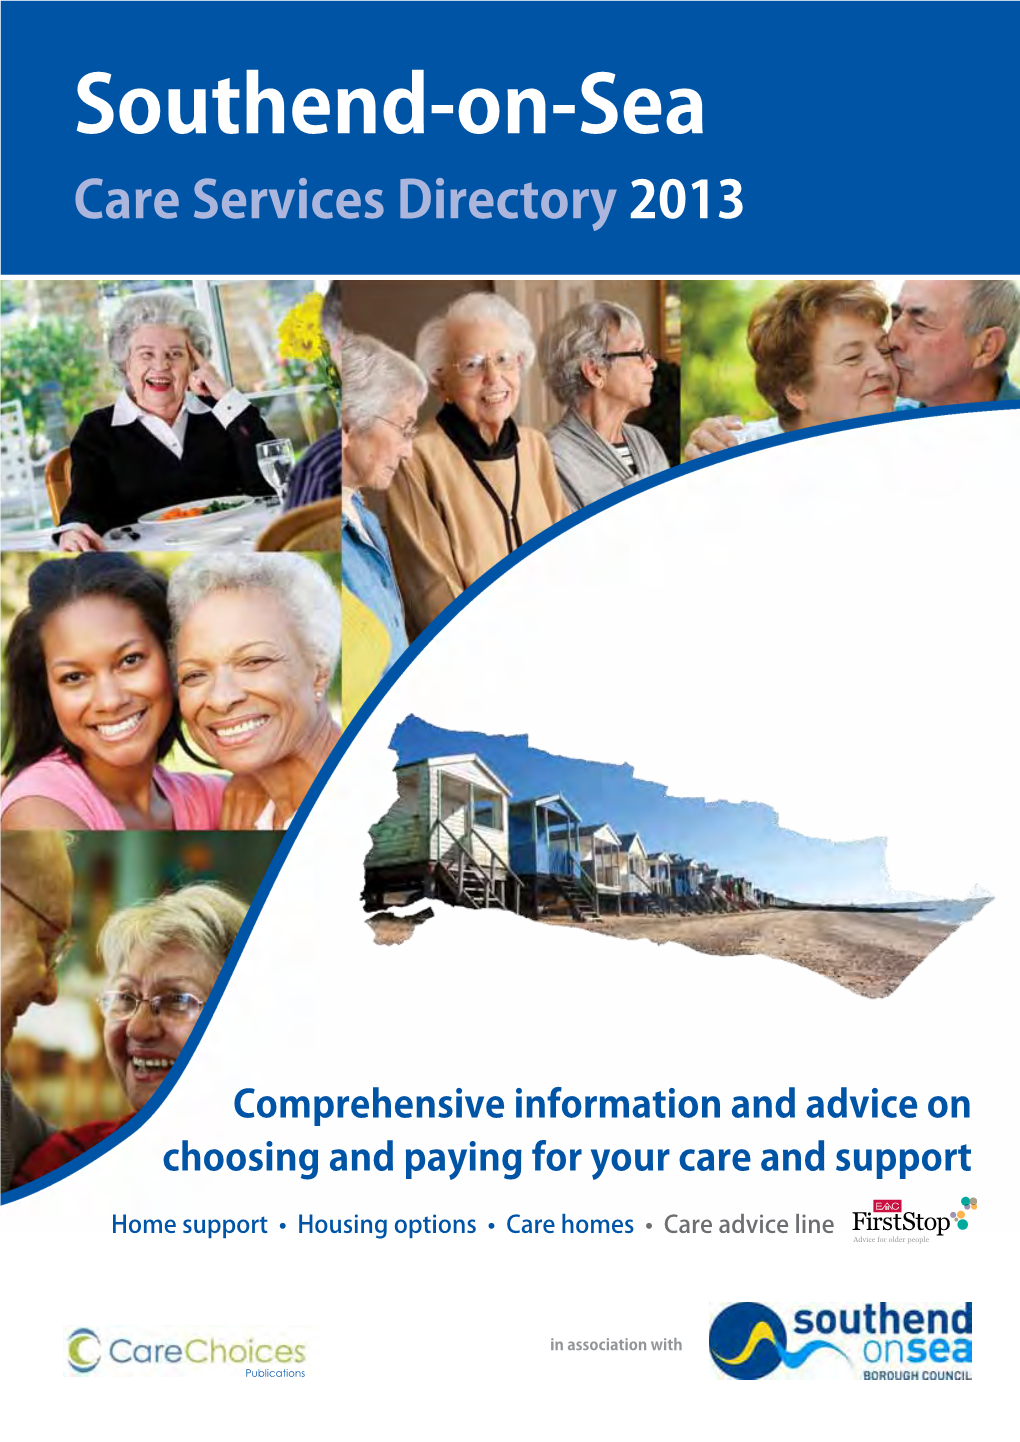 Care Services Directory 2013